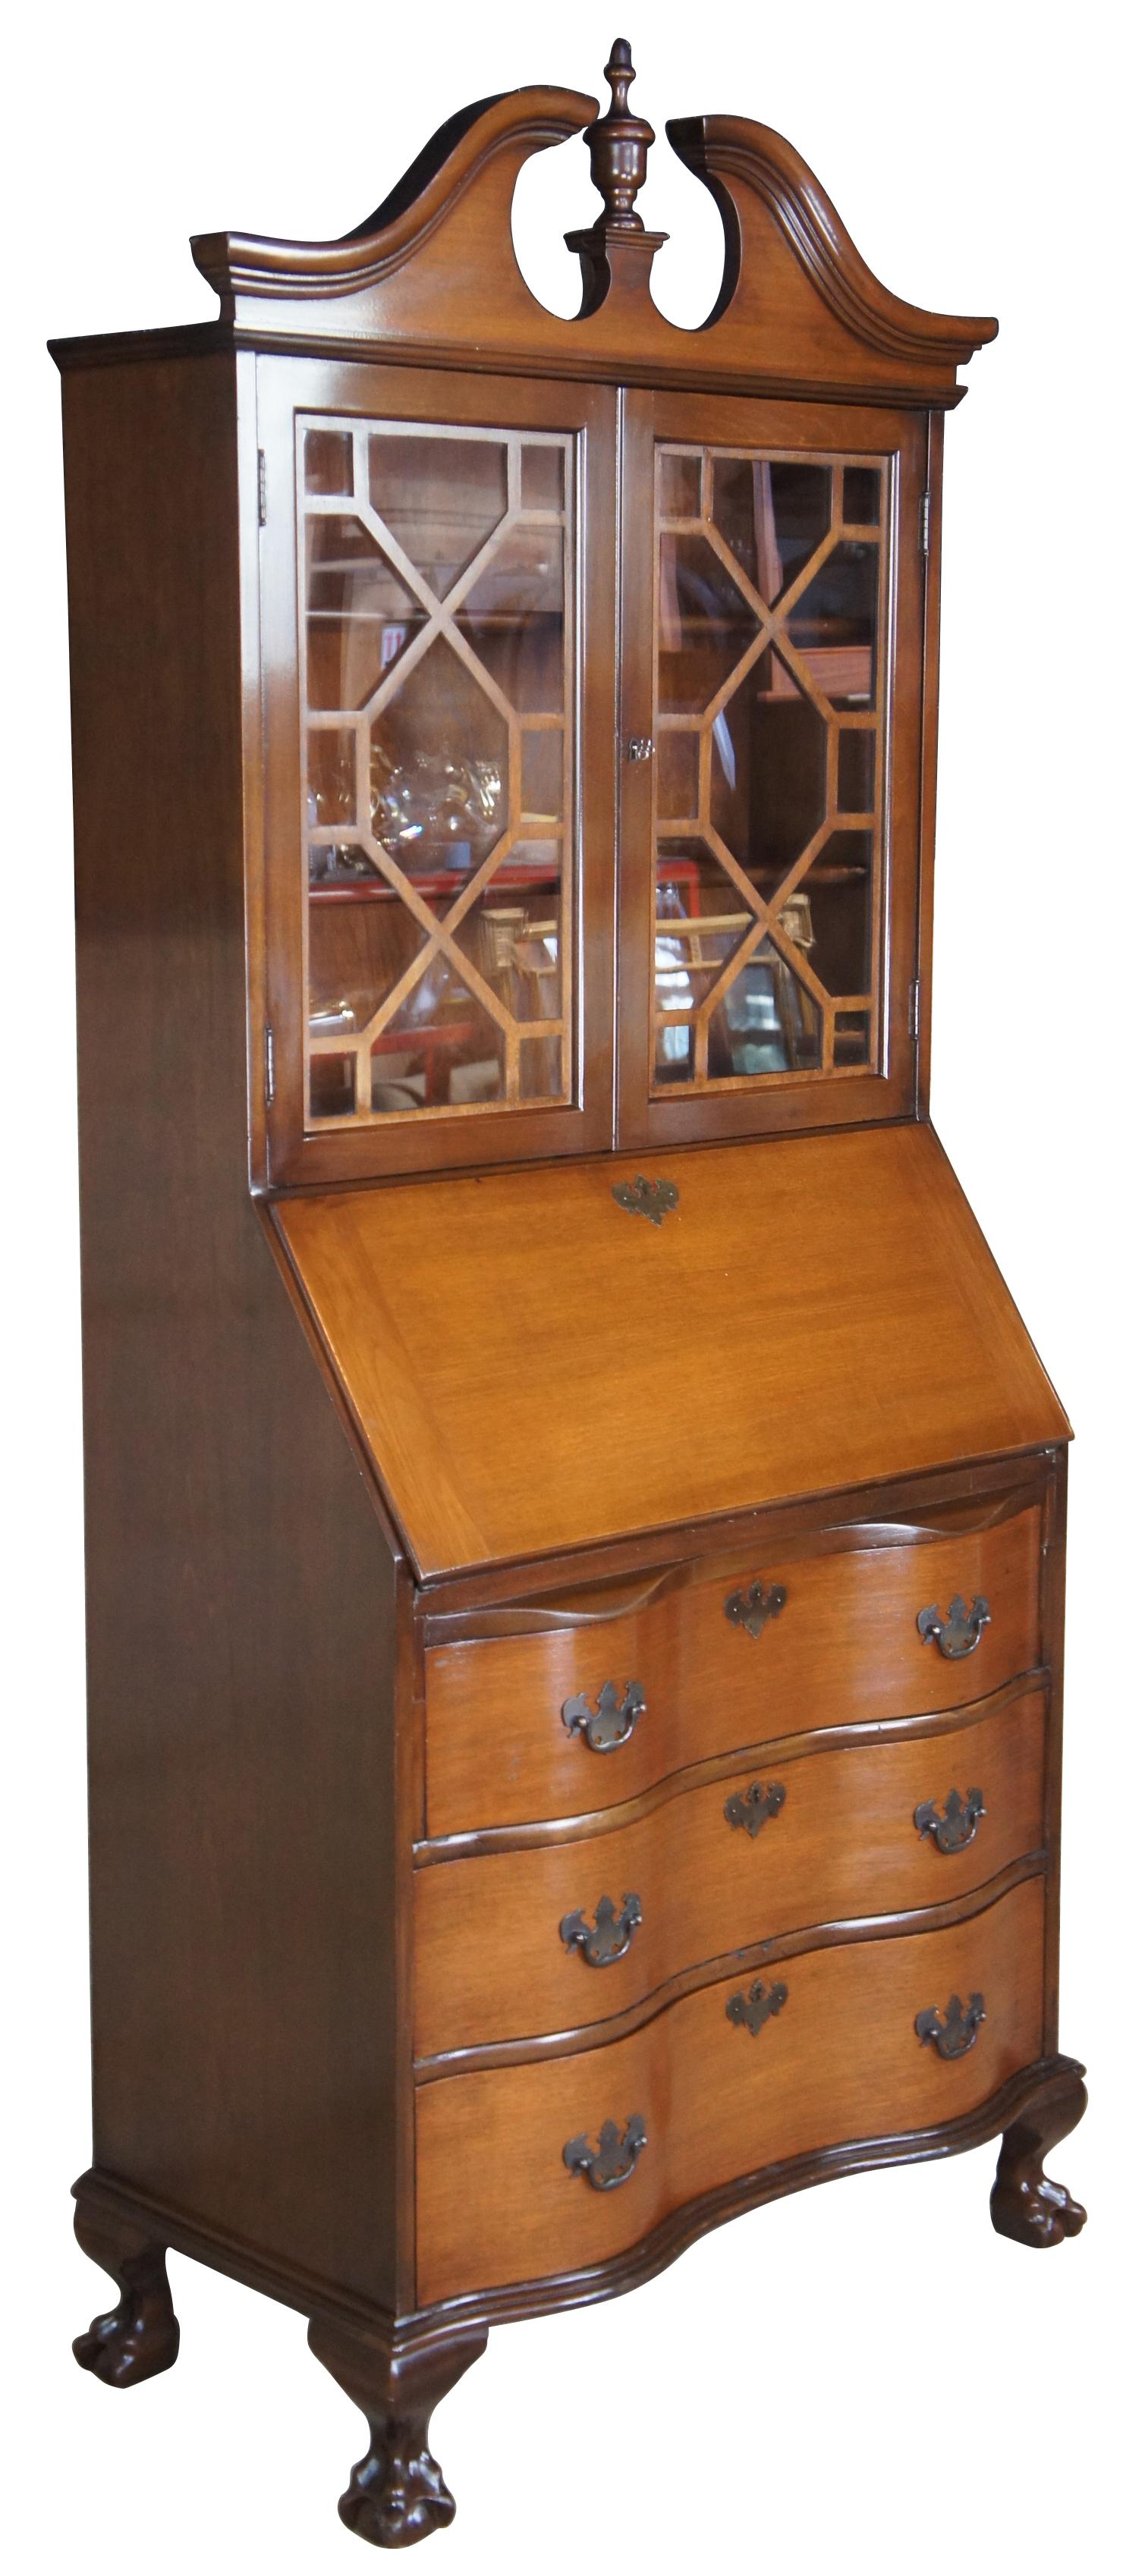 A gorgeous serpentine front one piece secretary desk by Maddox Tables of Jamestown NY. Made from American walnut. Interior opens to four drawers and multiple divided and hidden compartments. Upper bookcase portion shows an open pediment with turned